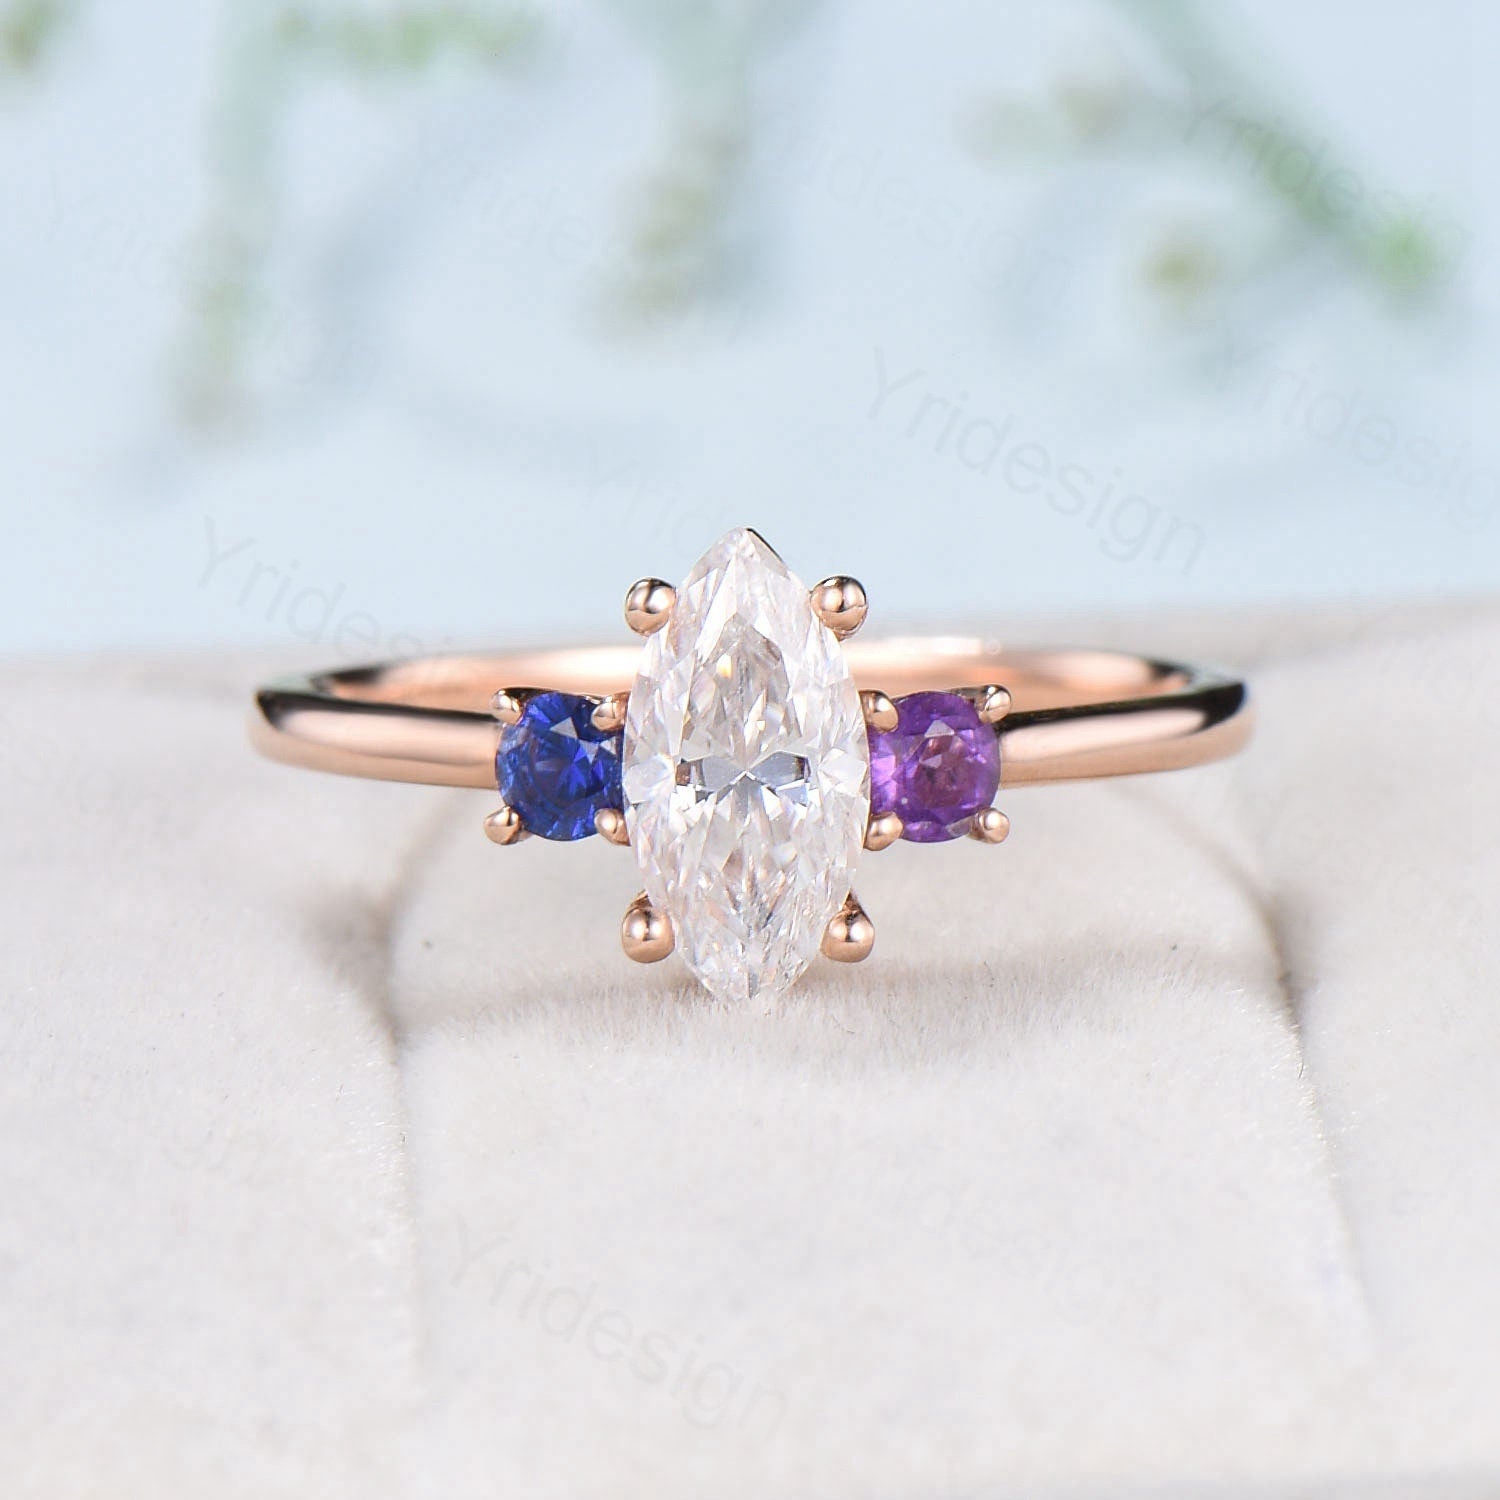 Dainty Marquise cut moissanite engagement ring rose gold Minimalist three stone engagement rings sapphire amethyst promise ring for women - PENFINE